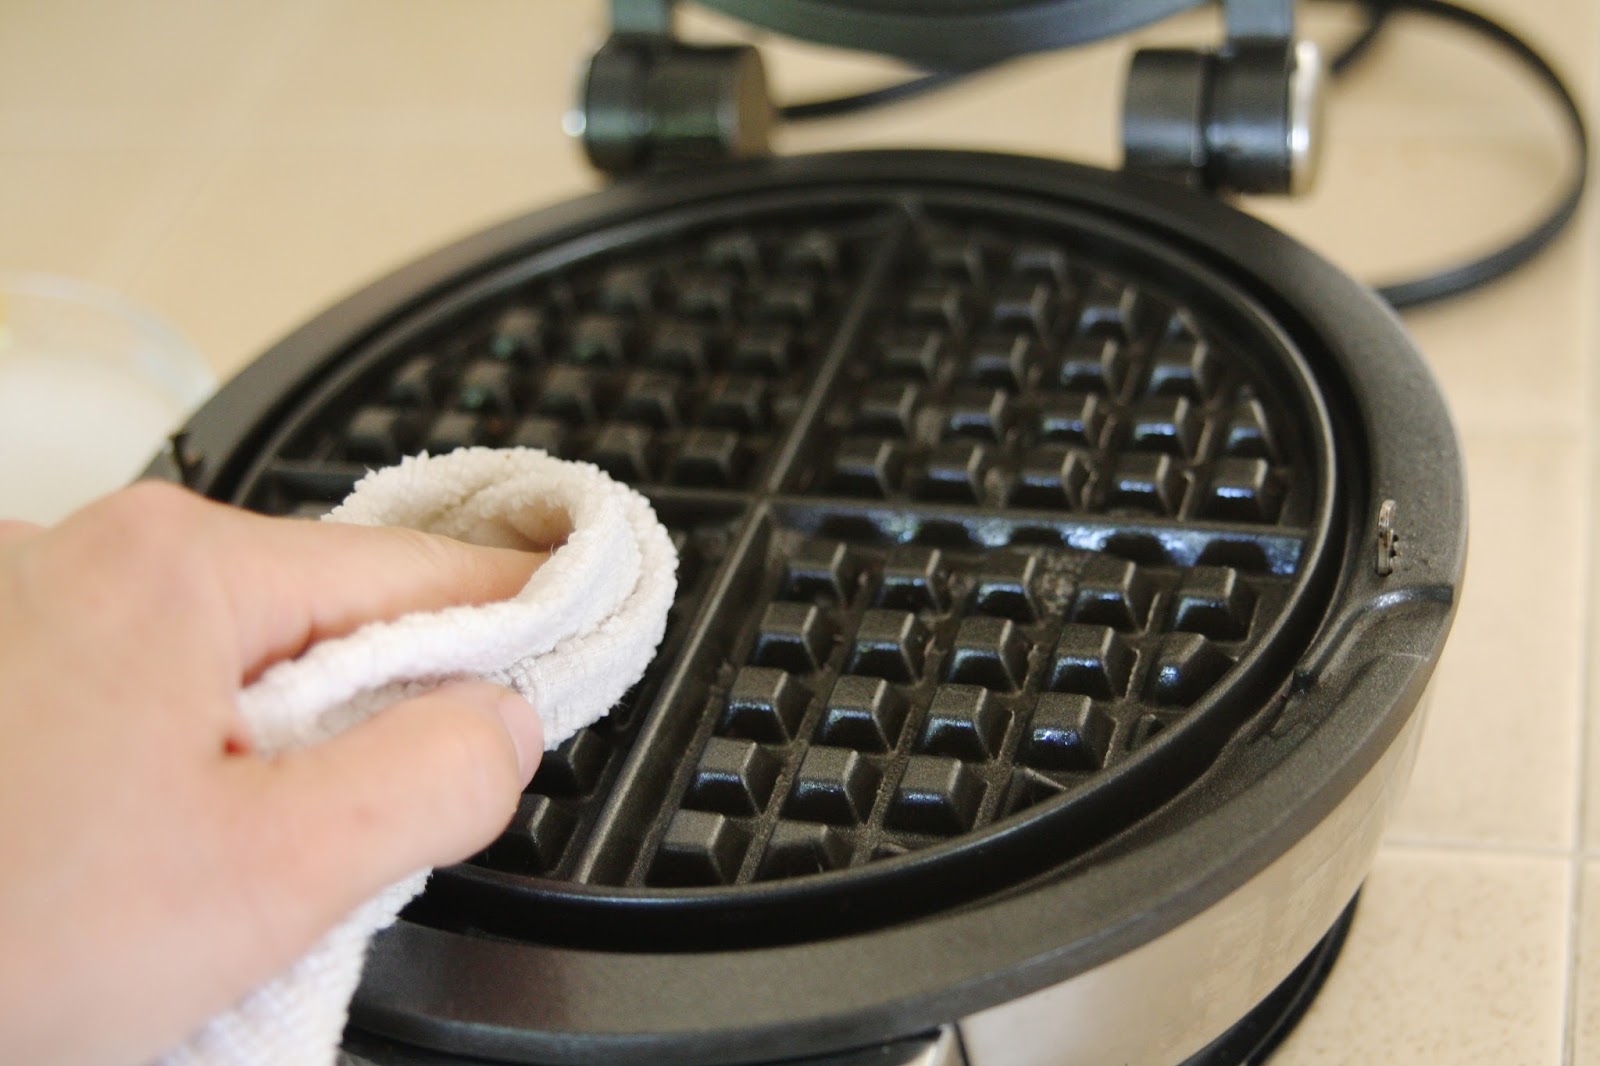 Cleaning Your Waffle Iron Doesn't Need To Be That Difficult